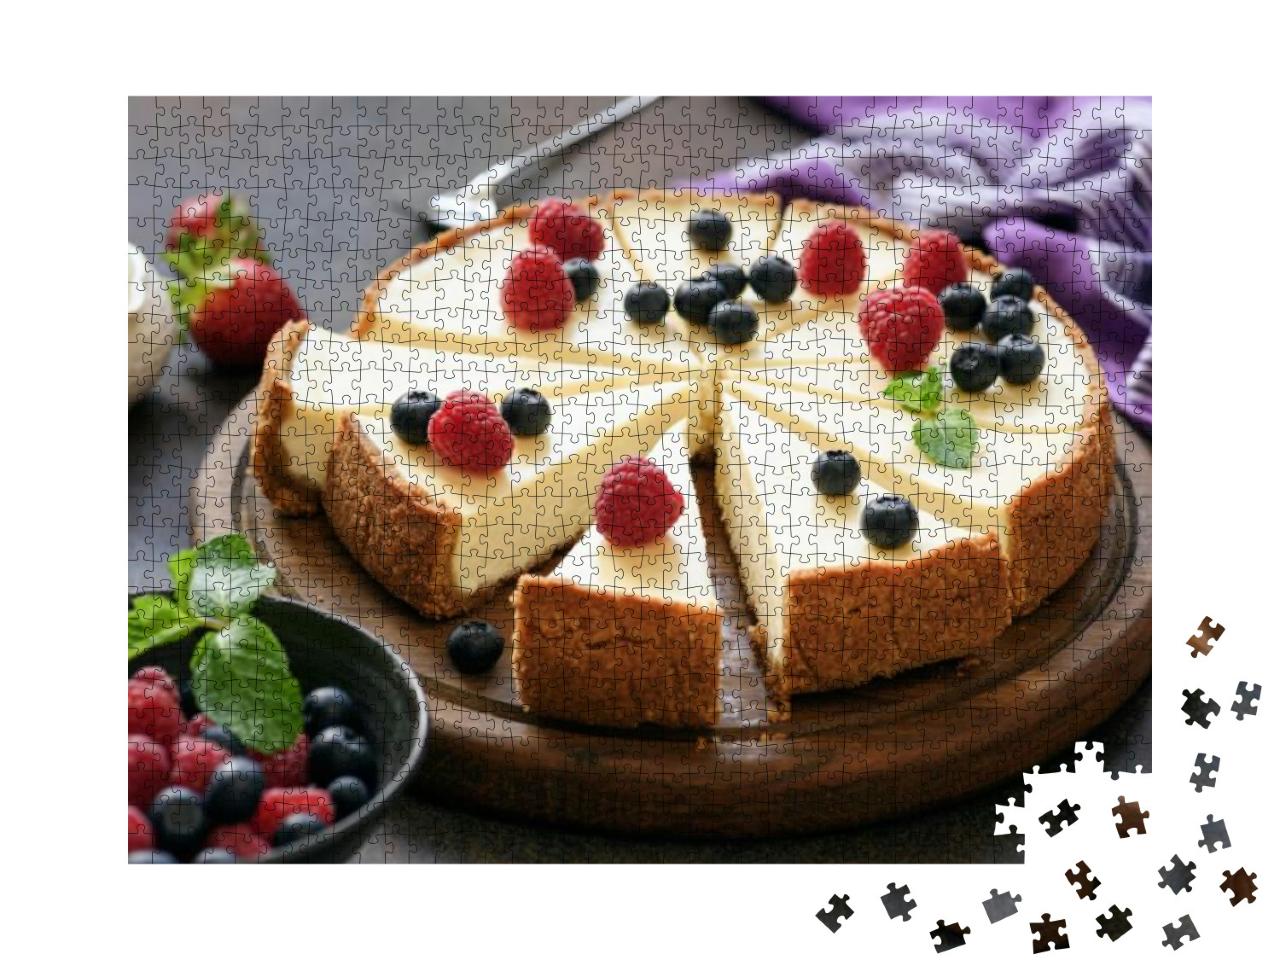 Classic Plain New York Cheesecake Sliced on Wooden Board... Jigsaw Puzzle with 1000 pieces